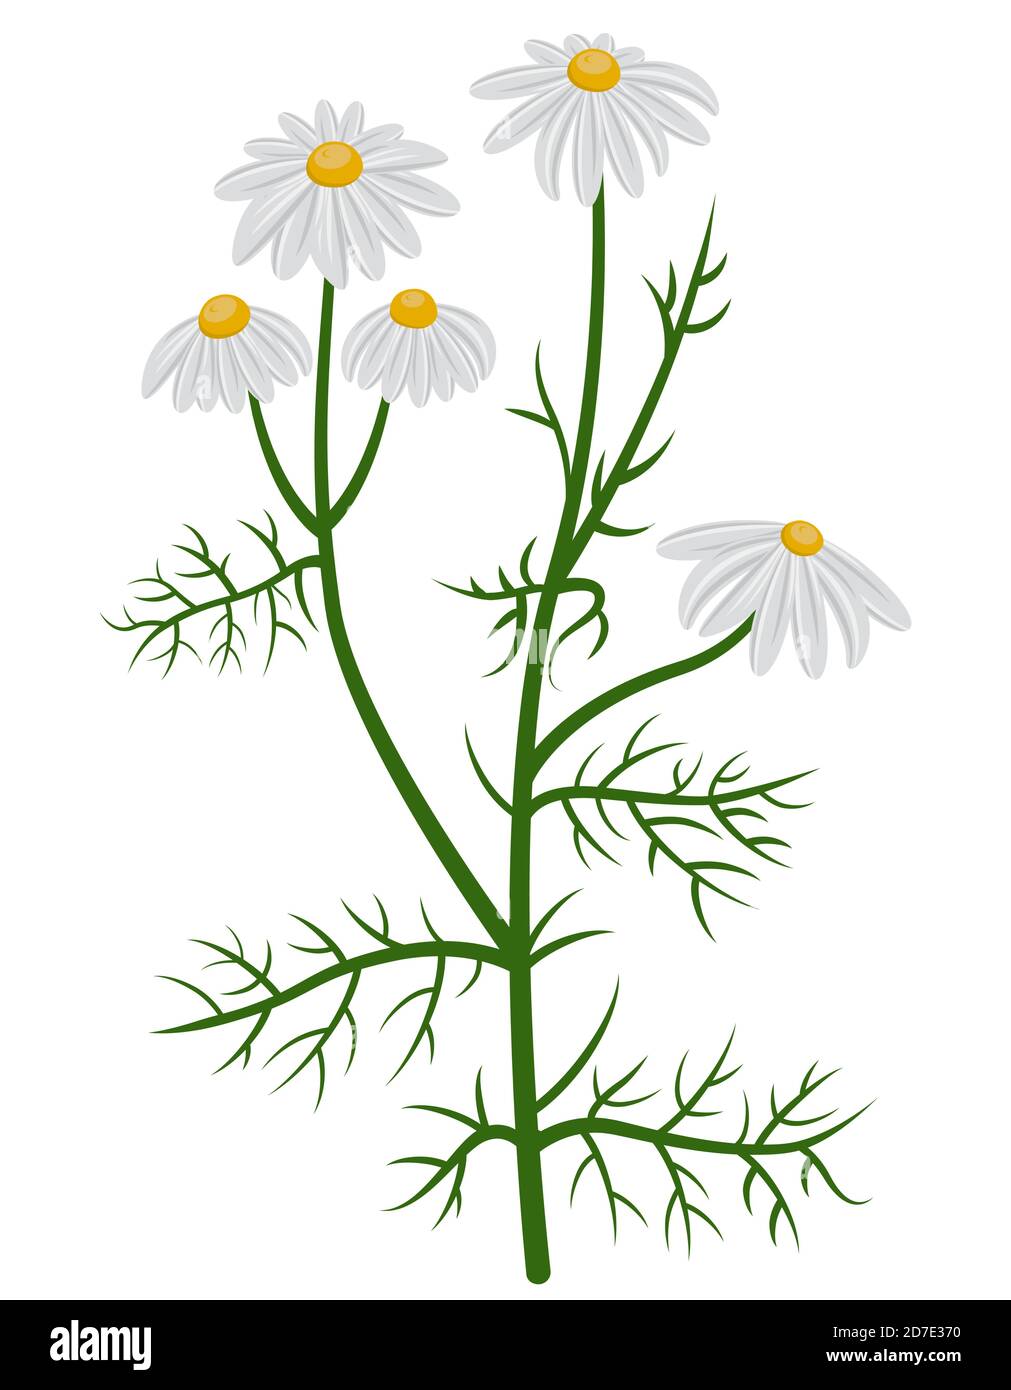 On chamomile flower Stock Vector Images - Alamy